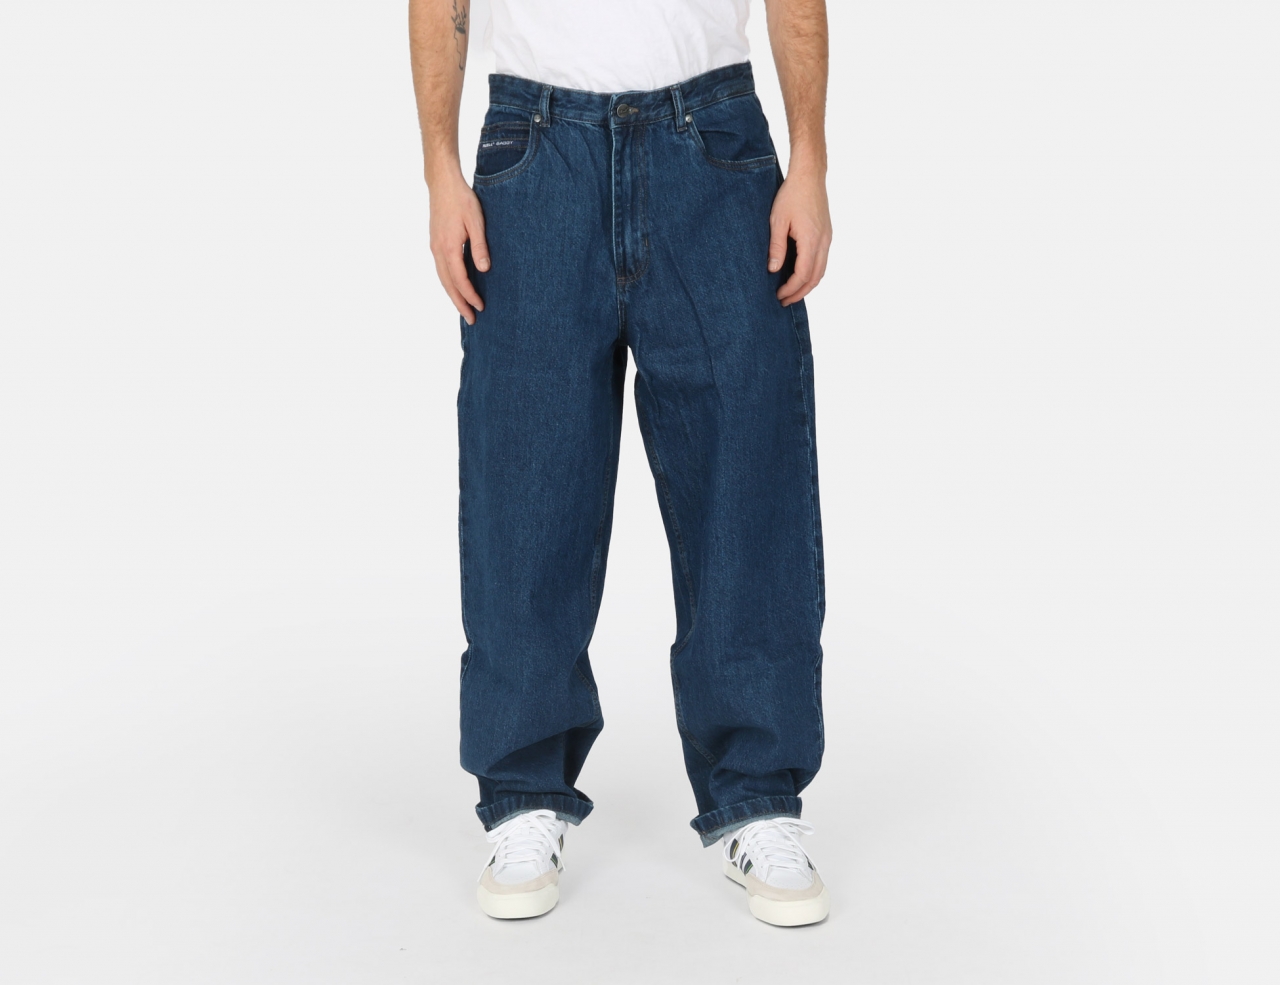 Reell Jeans Baggy Pant - Dark Stone Wash